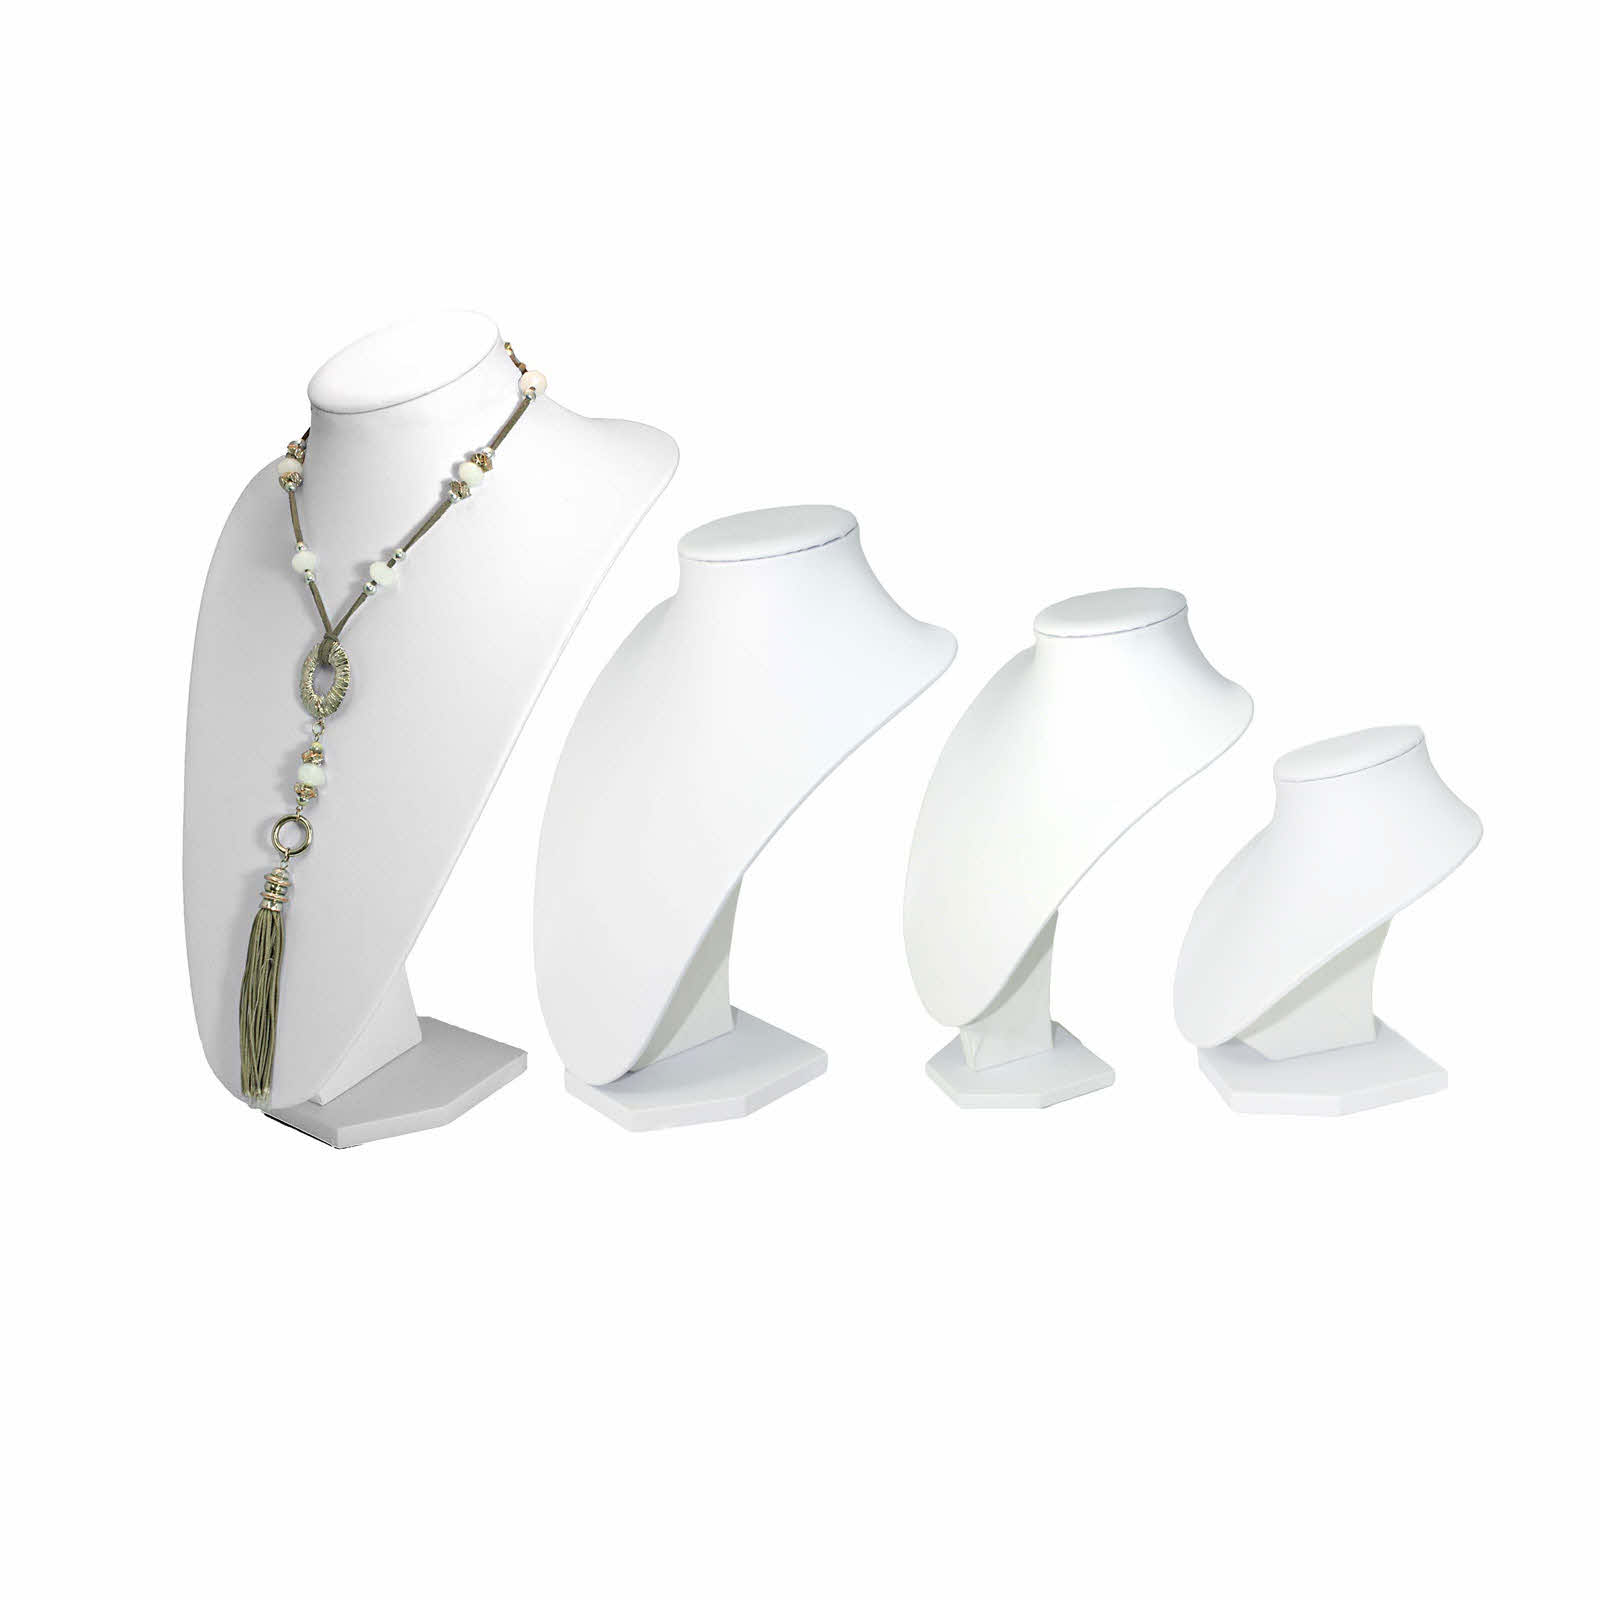 White Leatherette Busts